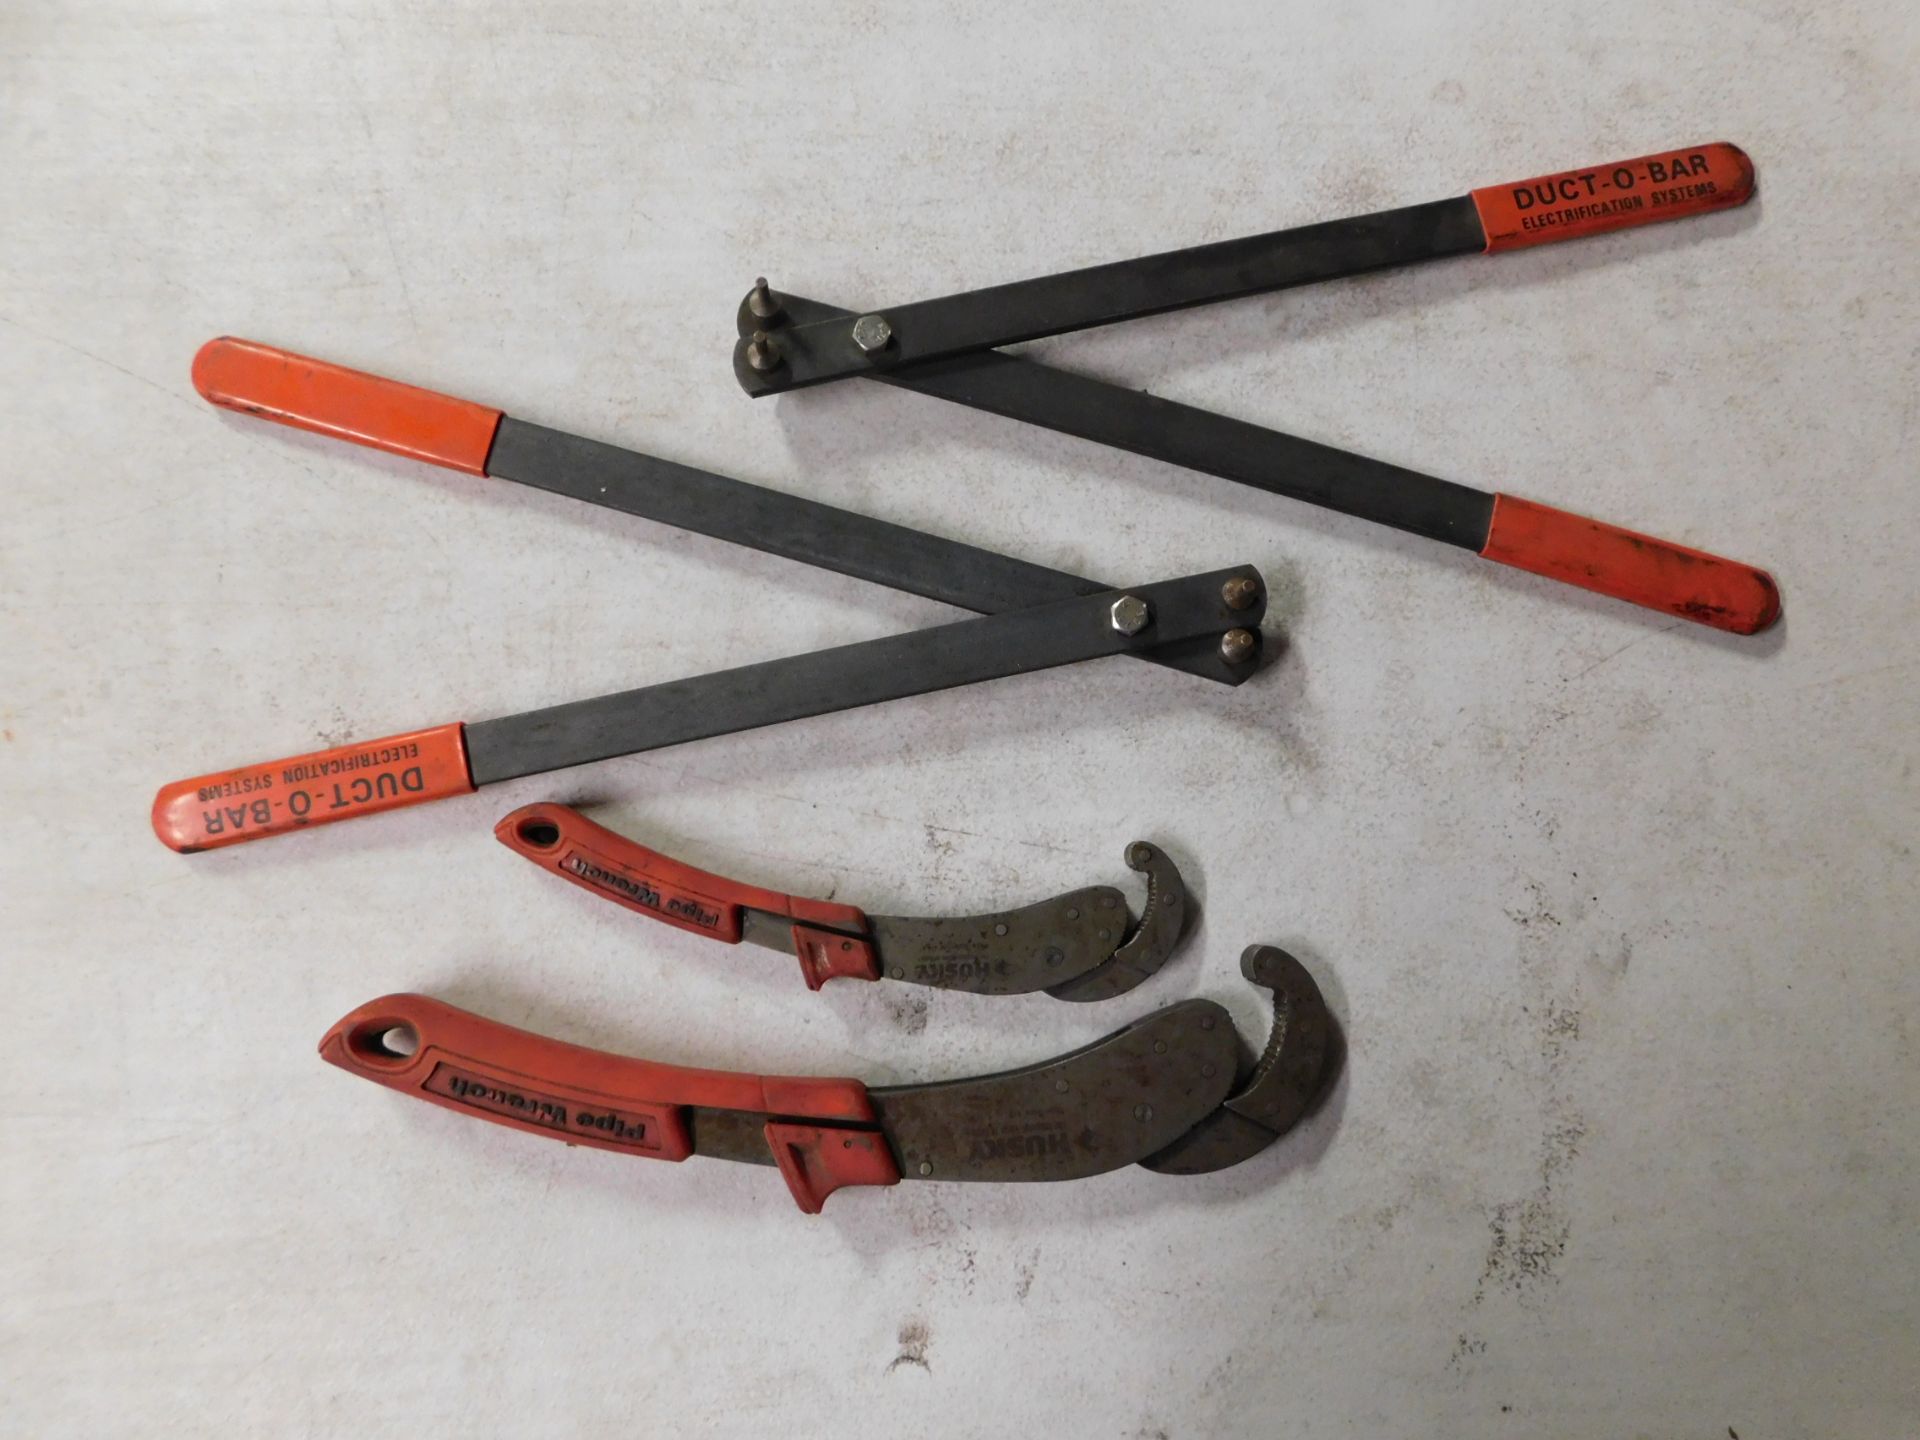 Duct-O-Bar Connector Tools & (2) Husky Pipe Wrenches